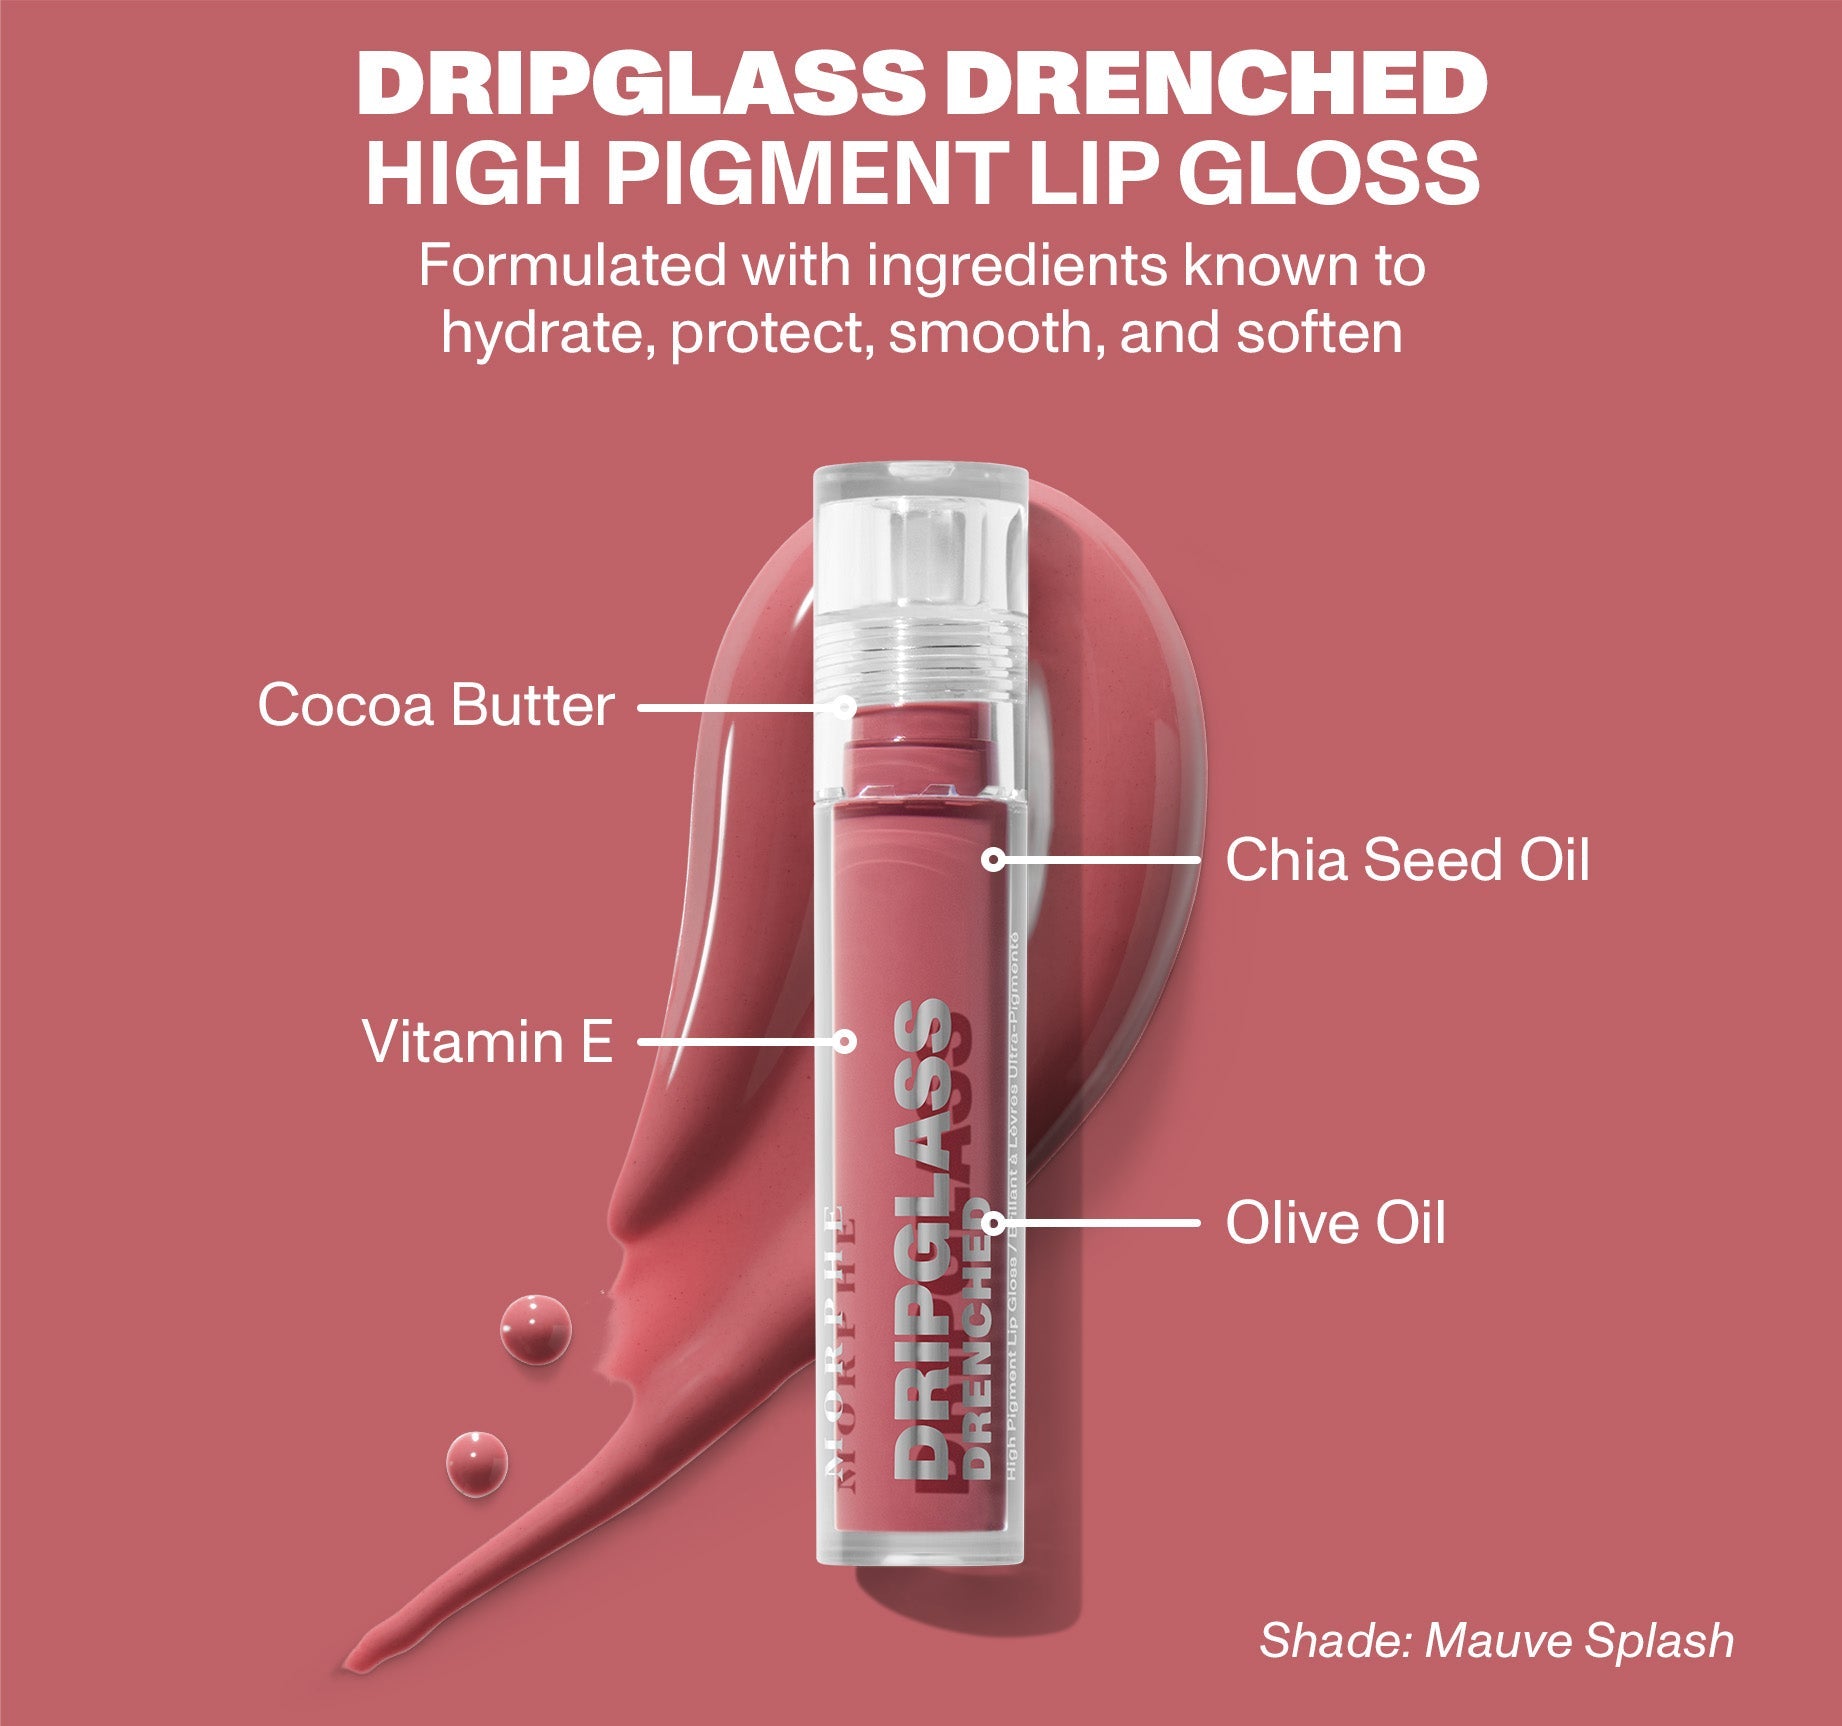 Dripglass Drenched High Pigment Lip Gloss - Drip Coffee - Image 9